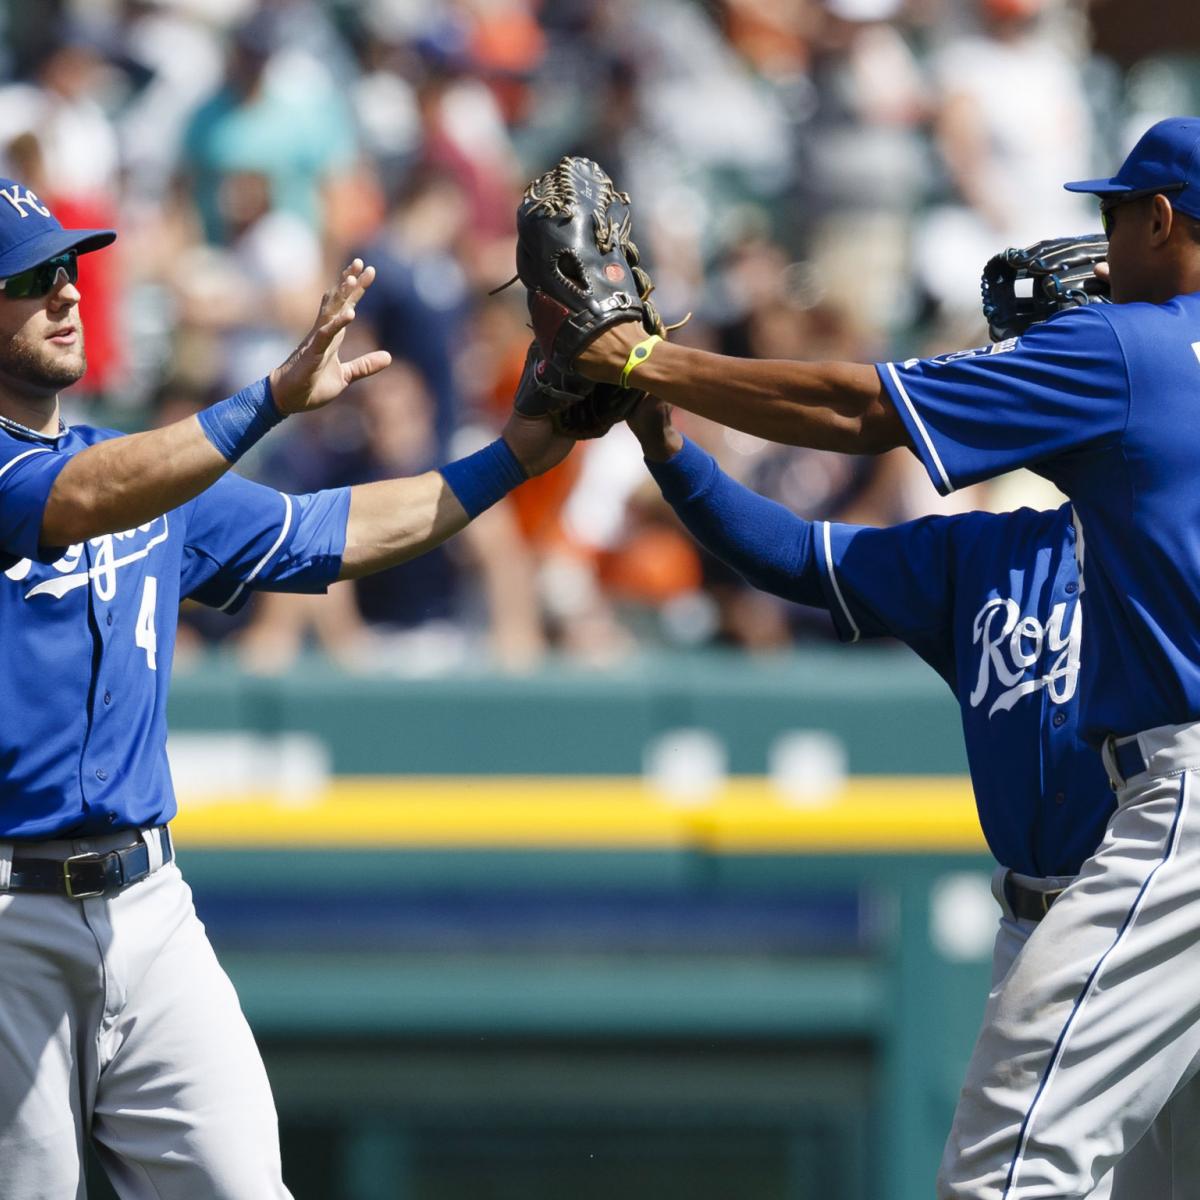 Predicting What the Kansas City Royals Starting Lineup Will Look Like